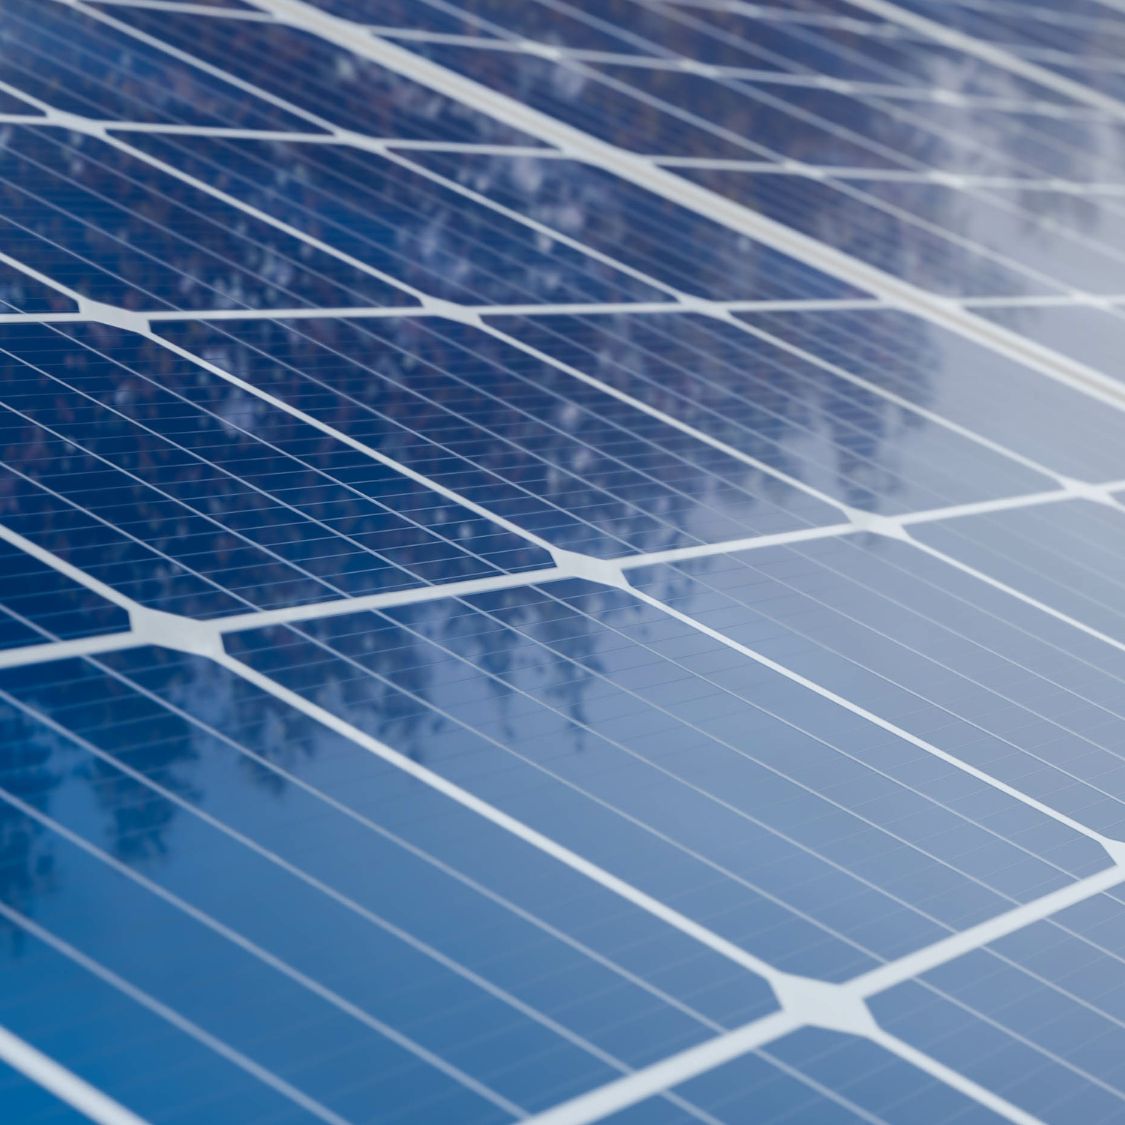 What You Need To Know Before Investing in Solar Panels